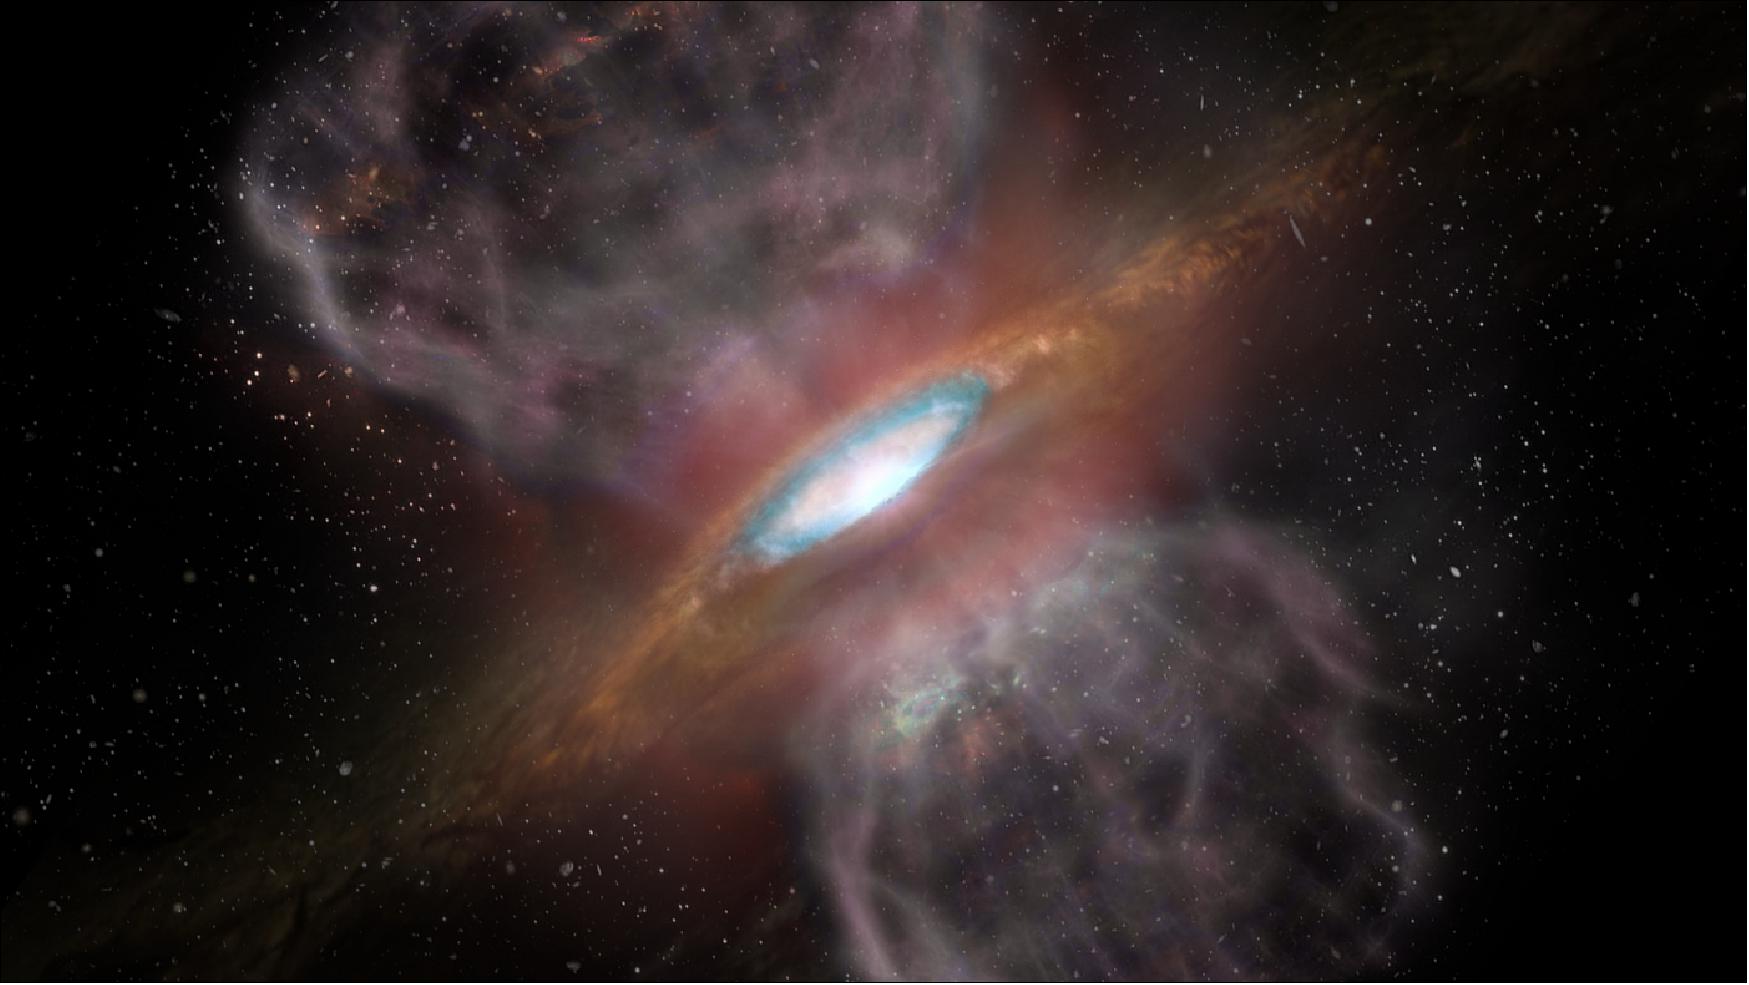 Figure 103: Artist impression of Orion Source I, a young, massive star about 1,500 light-years away. New ALMA observations detected a ring of salt — sodium chloride, ordinary table salt — surrounding the star. This is the first detection of salts of any kind associated with a young star. The blue region (about 1/3 the way out from the center of the disk) represents the region where ALMA detected the millimeter-wavelength “glow” from the salts (image credit: NRAO/AUI/NSF; S. Dagnello)